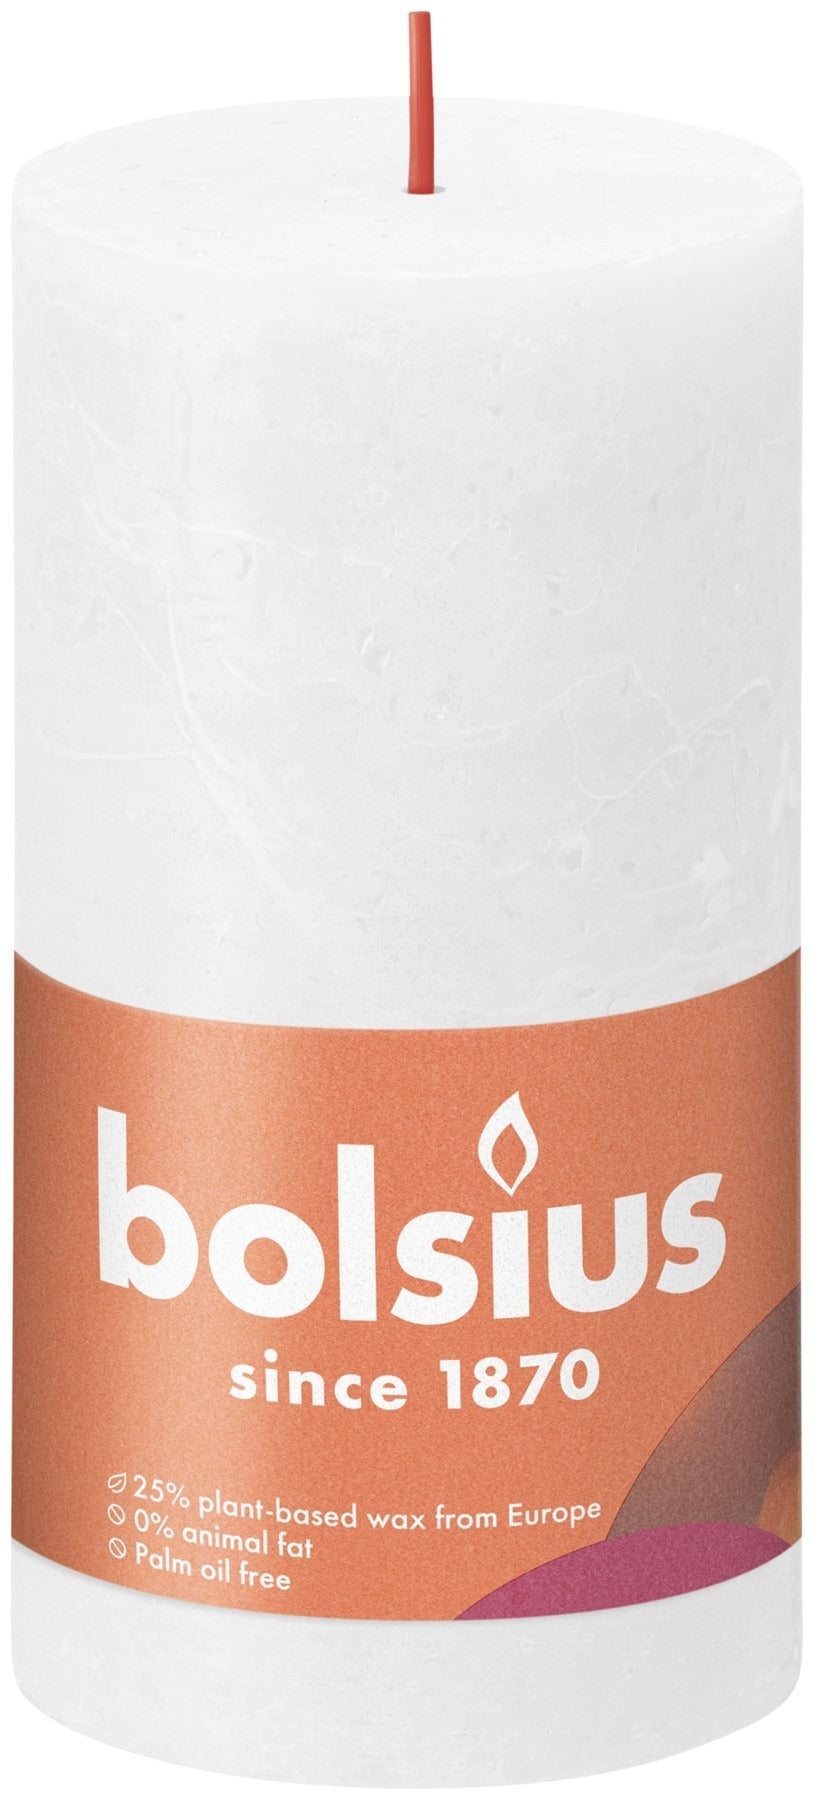 View Cloudy White Bolsius Rustic Shine Pillar Candle 130 x 68mm information